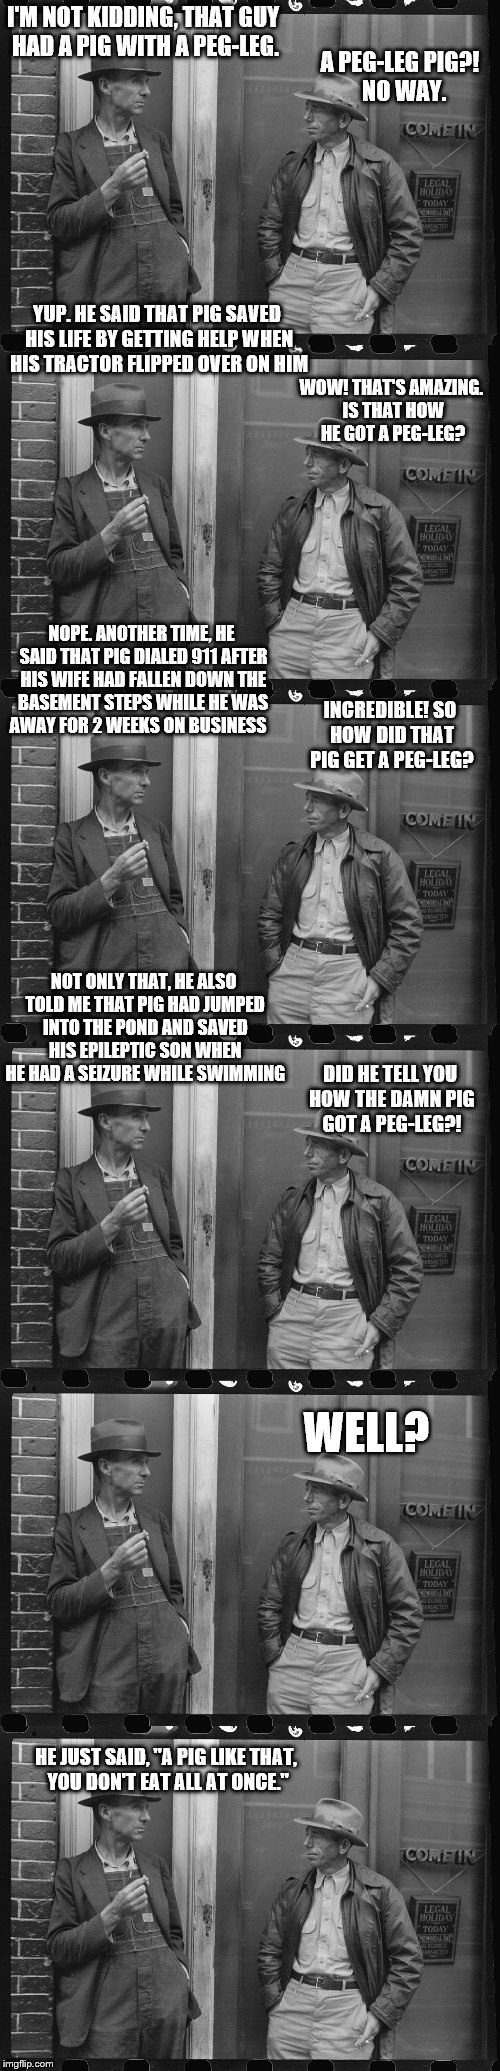 popular farmer meme | I'M NOT KIDDING, THAT GUY HAD A PIG WITH A PEG-LEG. A PEG-LEG PIG?!
 NO WAY. YUP. HE SAID THAT PIG SAVED HIS LIFE BY GETTING HELP WHEN HIS TRACTOR FLIPPED OVER ON HIM; WOW! THAT'S AMAZING. IS THAT HOW HE GOT A PEG-LEG? NOPE. ANOTHER TIME, HE SAID THAT PIG DIALED 911 AFTER HIS WIFE HAD FALLEN DOWN THE BASEMENT STEPS WHILE HE WAS AWAY FOR 2 WEEKS ON BUSINESS; INCREDIBLE! SO HOW DID THAT PIG GET A PEG-LEG? NOT ONLY THAT, HE ALSO TOLD ME THAT PIG HAD JUMPED INTO THE POND AND SAVED HIS EPILEPTIC SON WHEN HE HAD A SEIZURE WHILE SWIMMING; DID HE TELL YOU HOW THE DAMN PIG GOT A PEG-LEG?! WELL? HE JUST SAID, "A PIG LIKE THAT, YOU DON'T EAT ALL AT ONCE." | image tagged in popular farmer meme | made w/ Imgflip meme maker